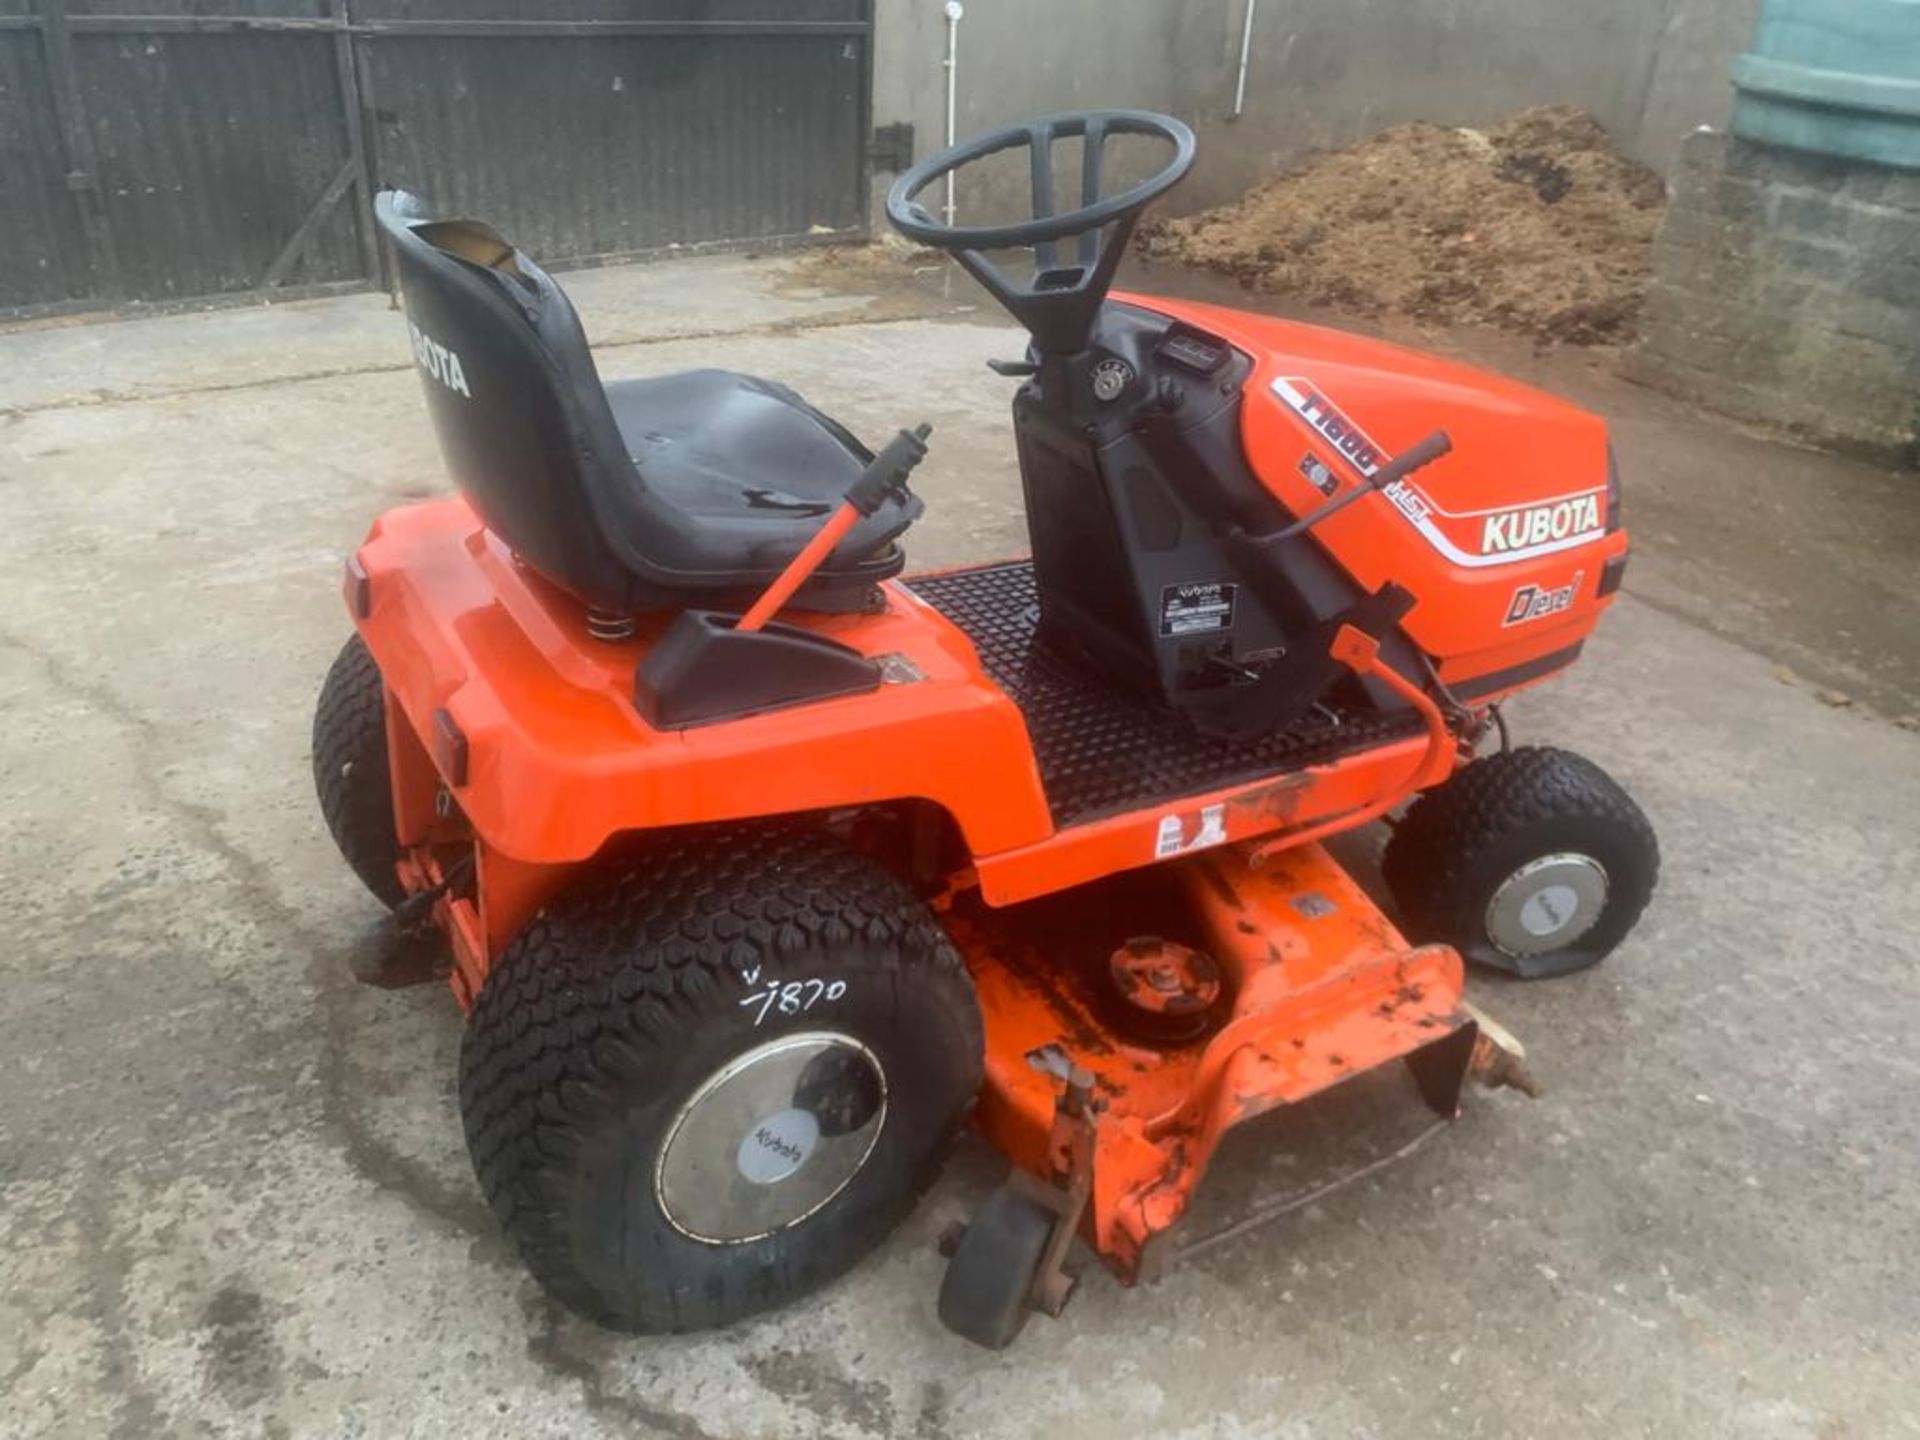 KUBOTA DIESEL RIDE ON MOWER, STRICTLY FOR PARTS ONLY, DELIVERY ANYWHERE UK £150 *PLUS VAT* - Image 4 of 7